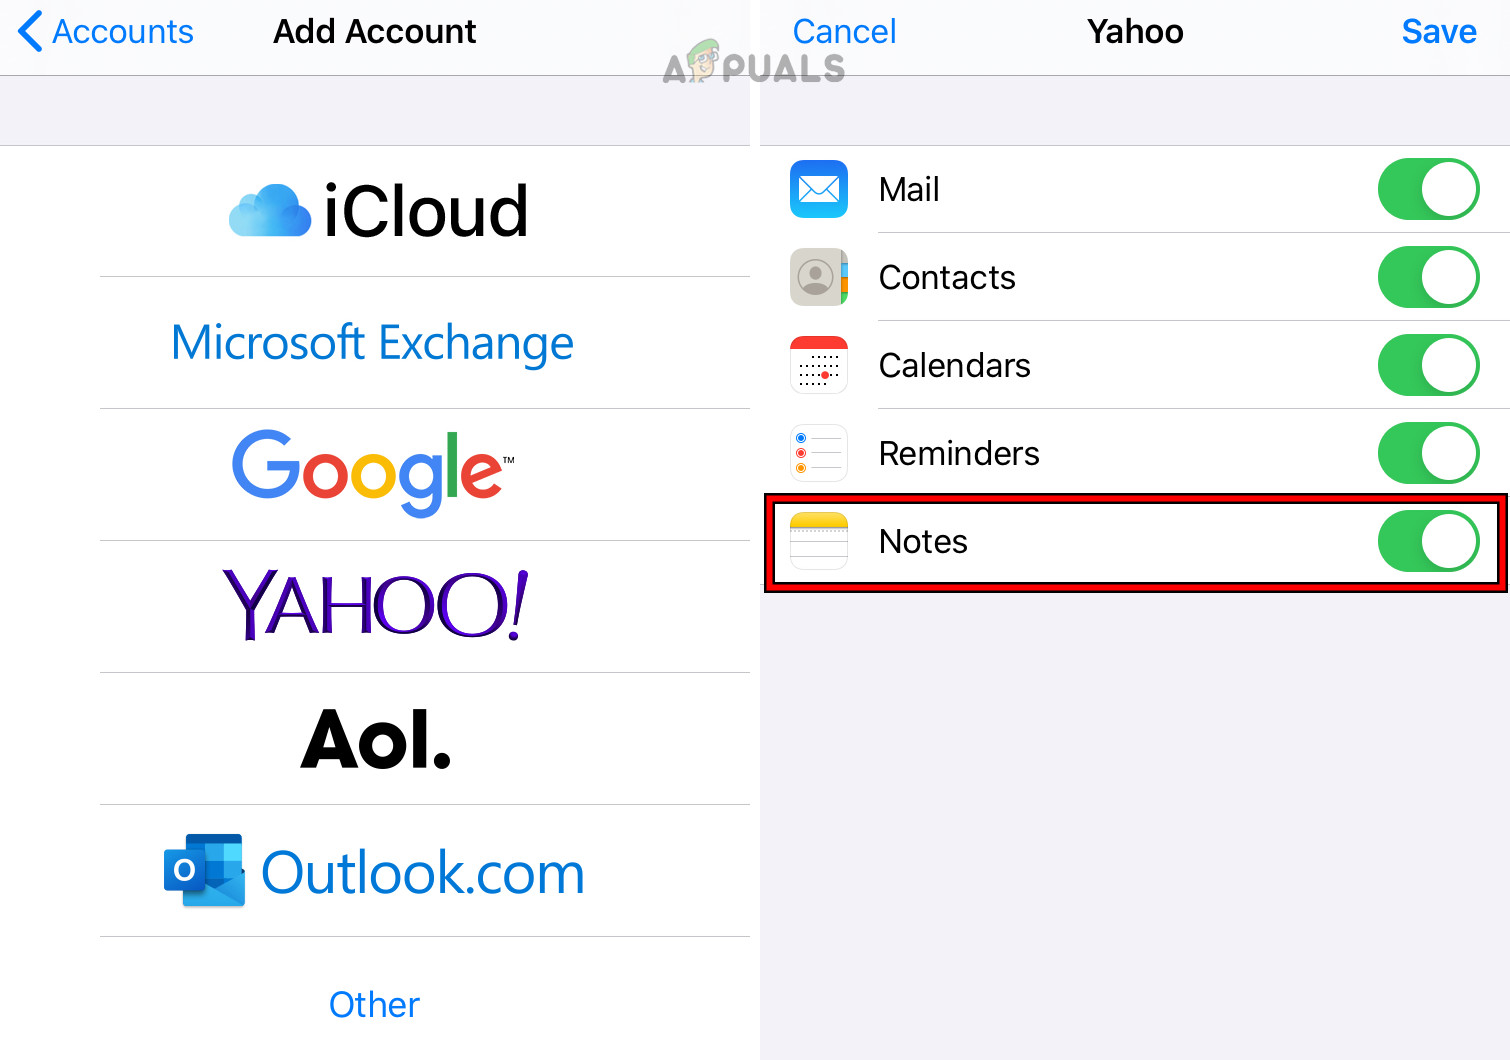 Enable Notes for the Email Account